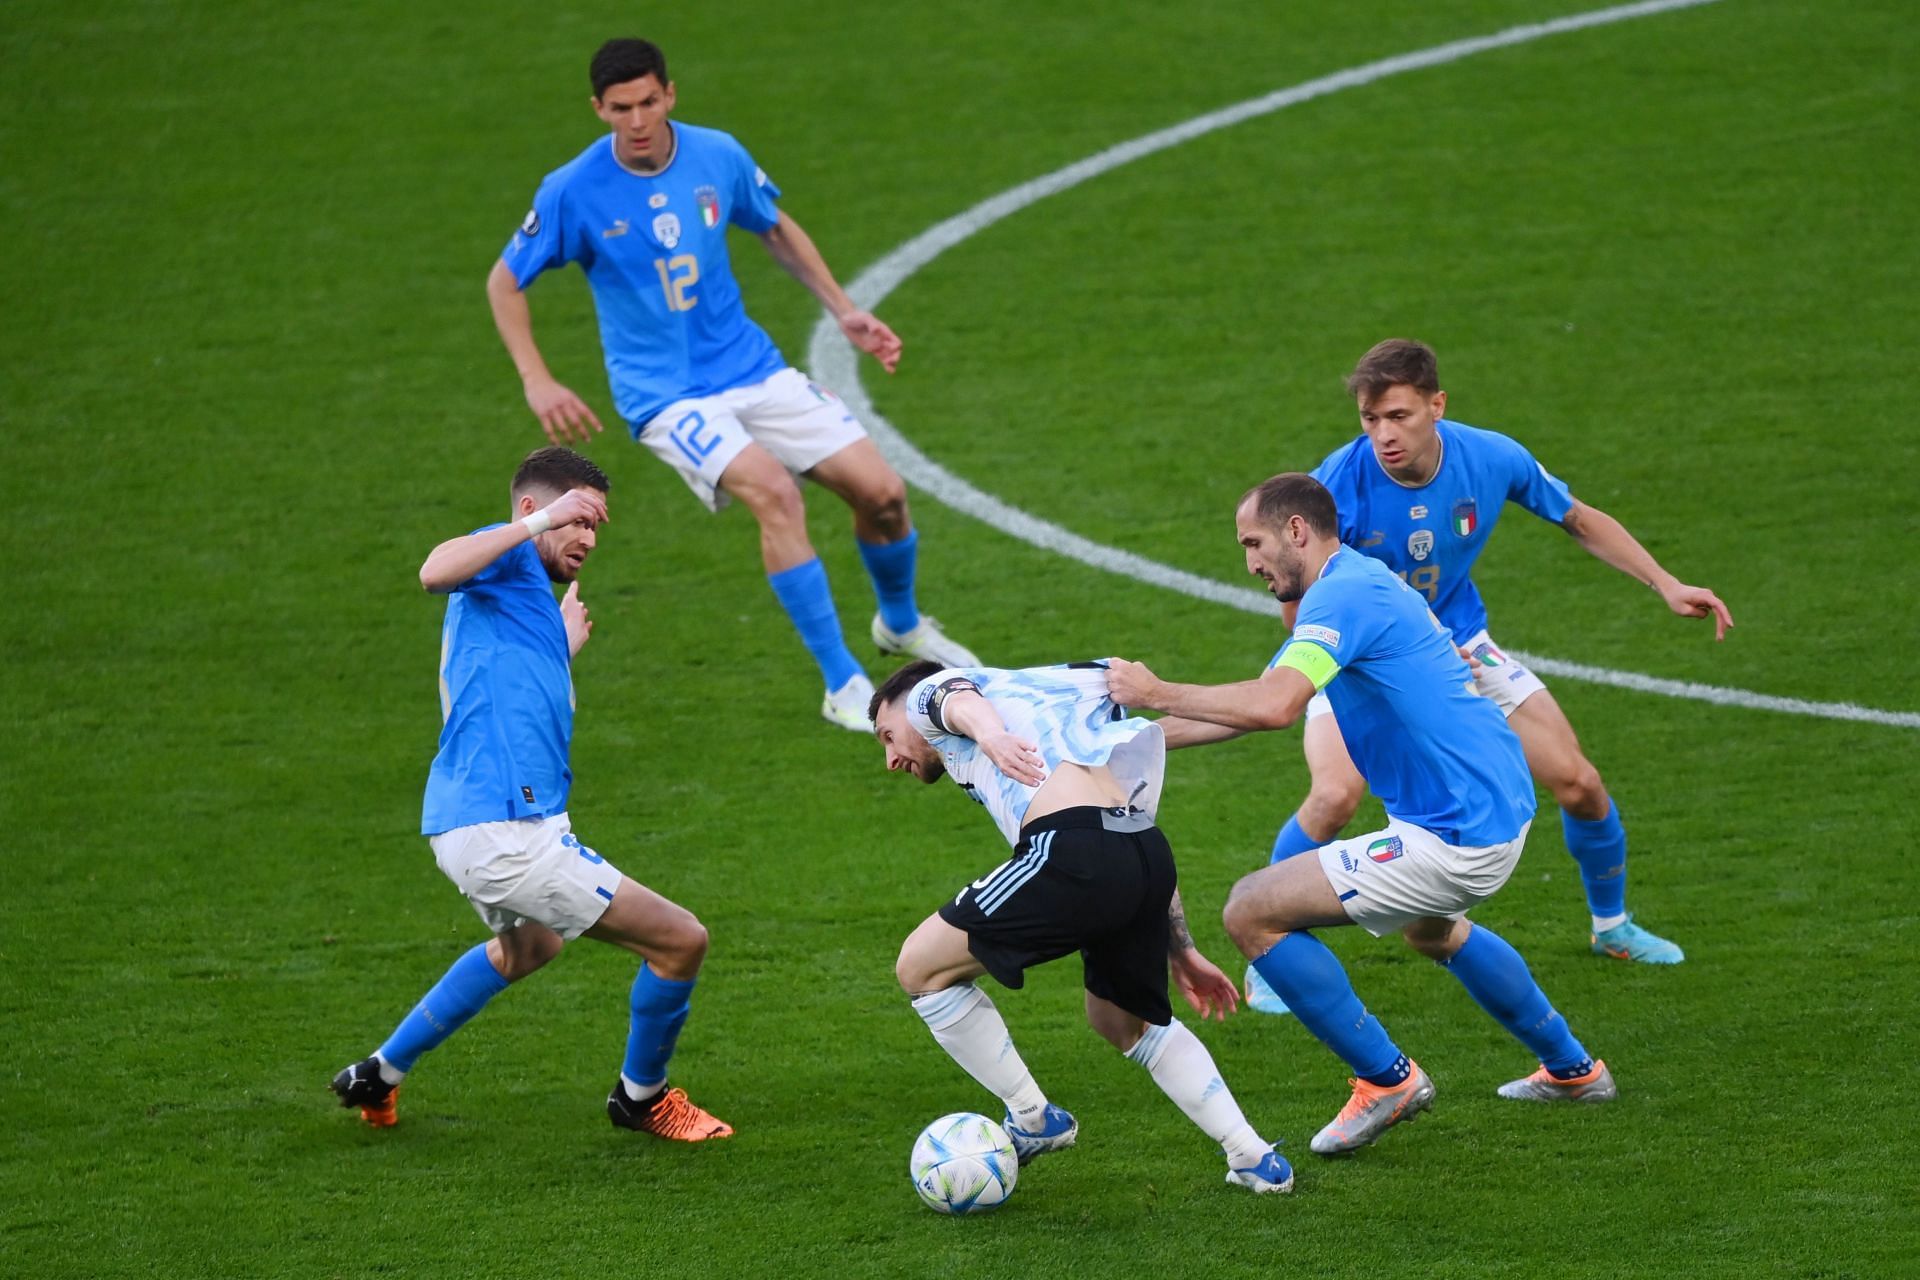 Lionel Messi oozed class and bamboozled Italy with a stellar performance.